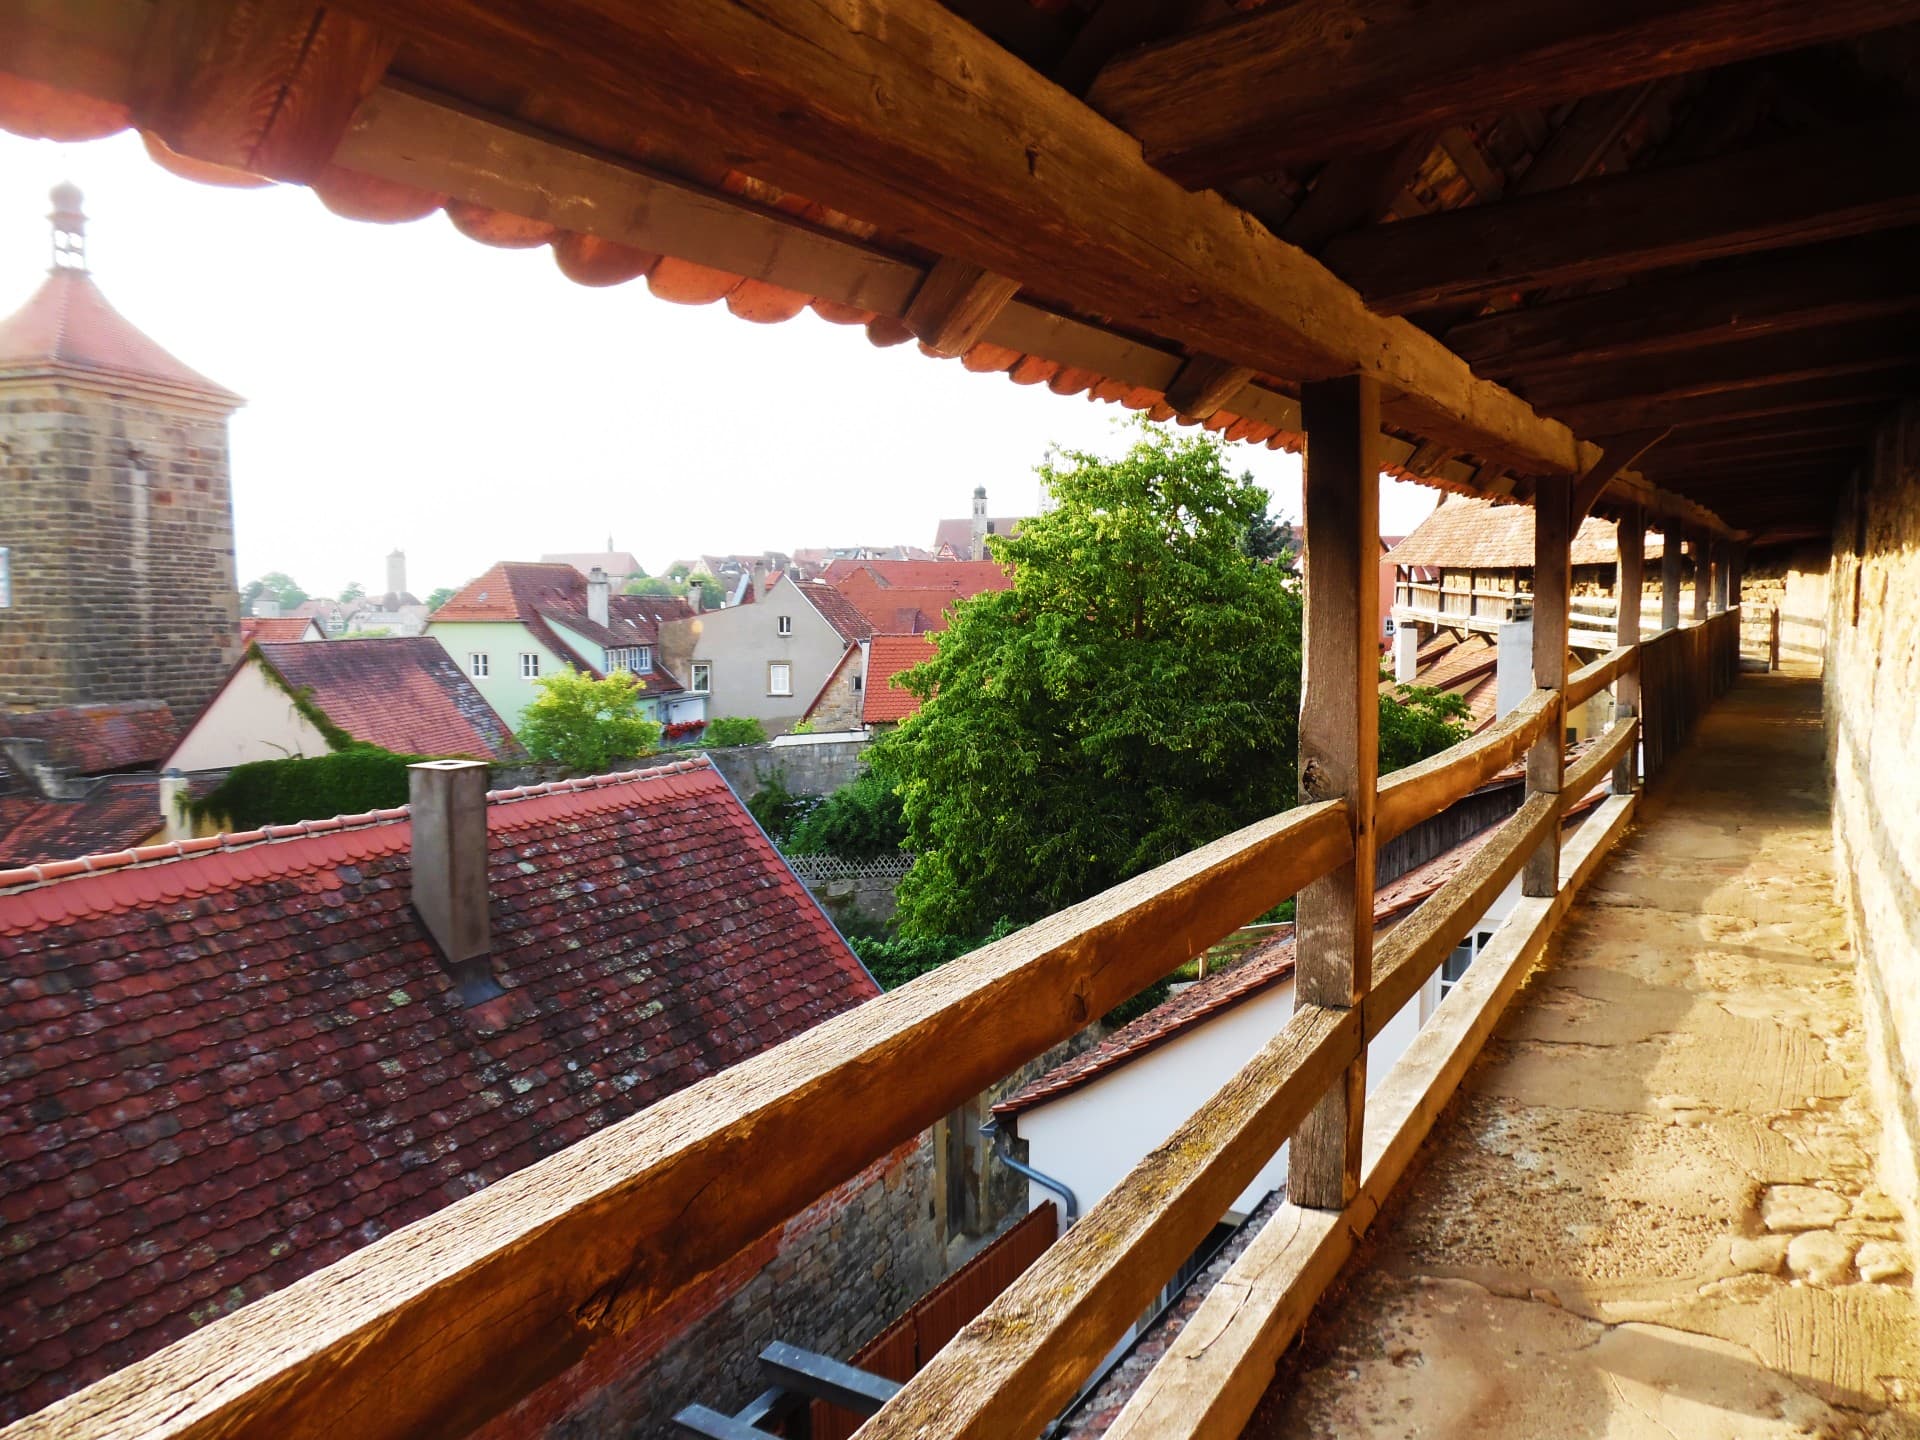 The view over Rothenburg ob der Tauber from the city walls walk